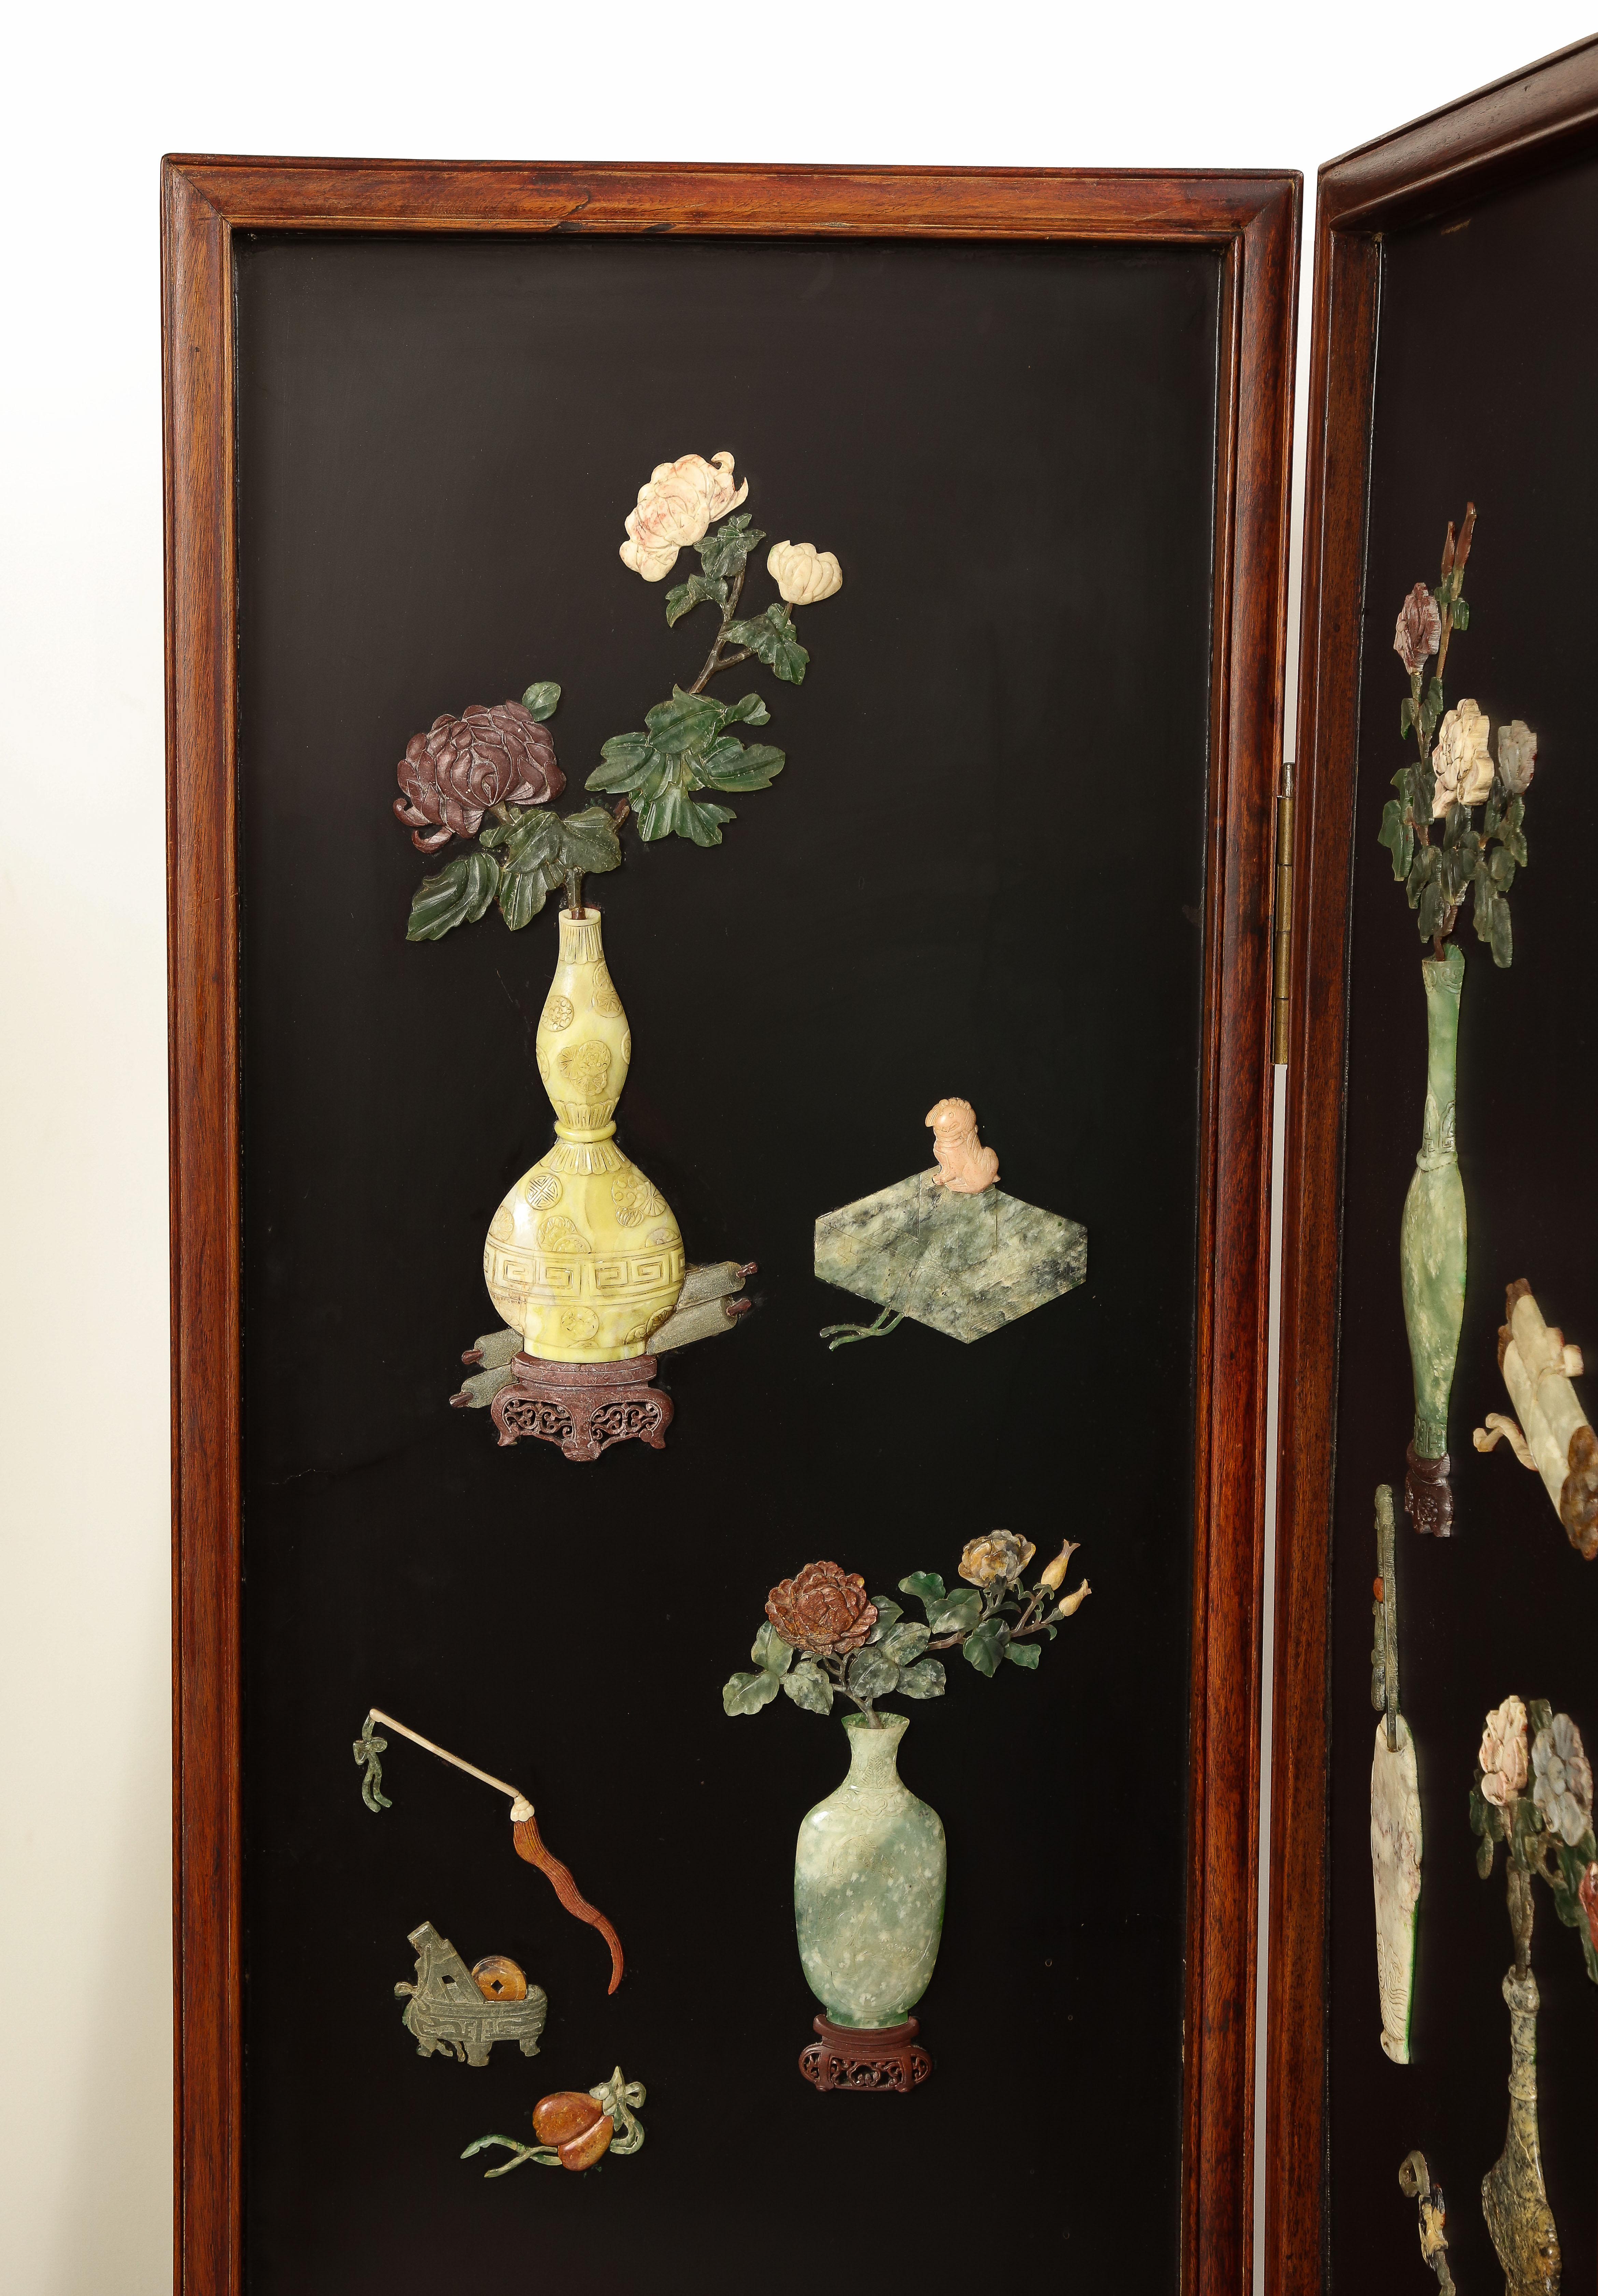 Large 20th C. Chinese 6 Panel Lacquered Hardstone and Jade Coromandel Screen For Sale 4